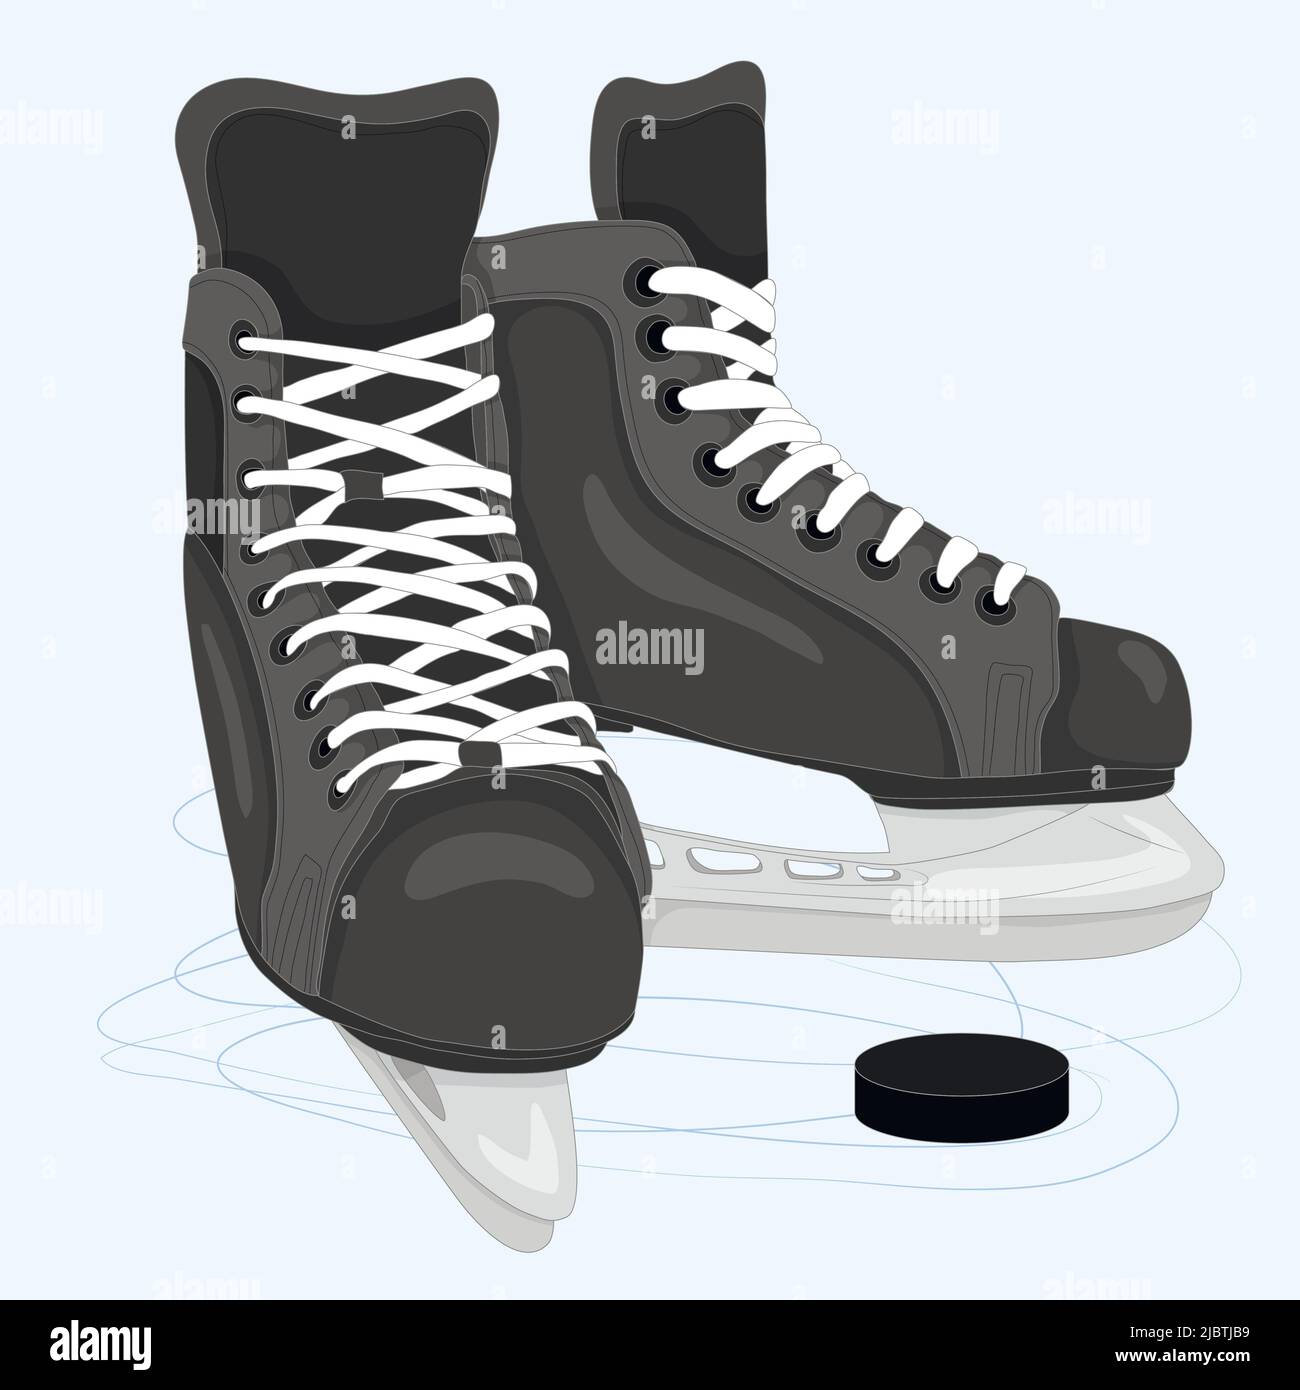 Skates for hockey and ice skating. Icon for sports figure skating sections. Stock Vector